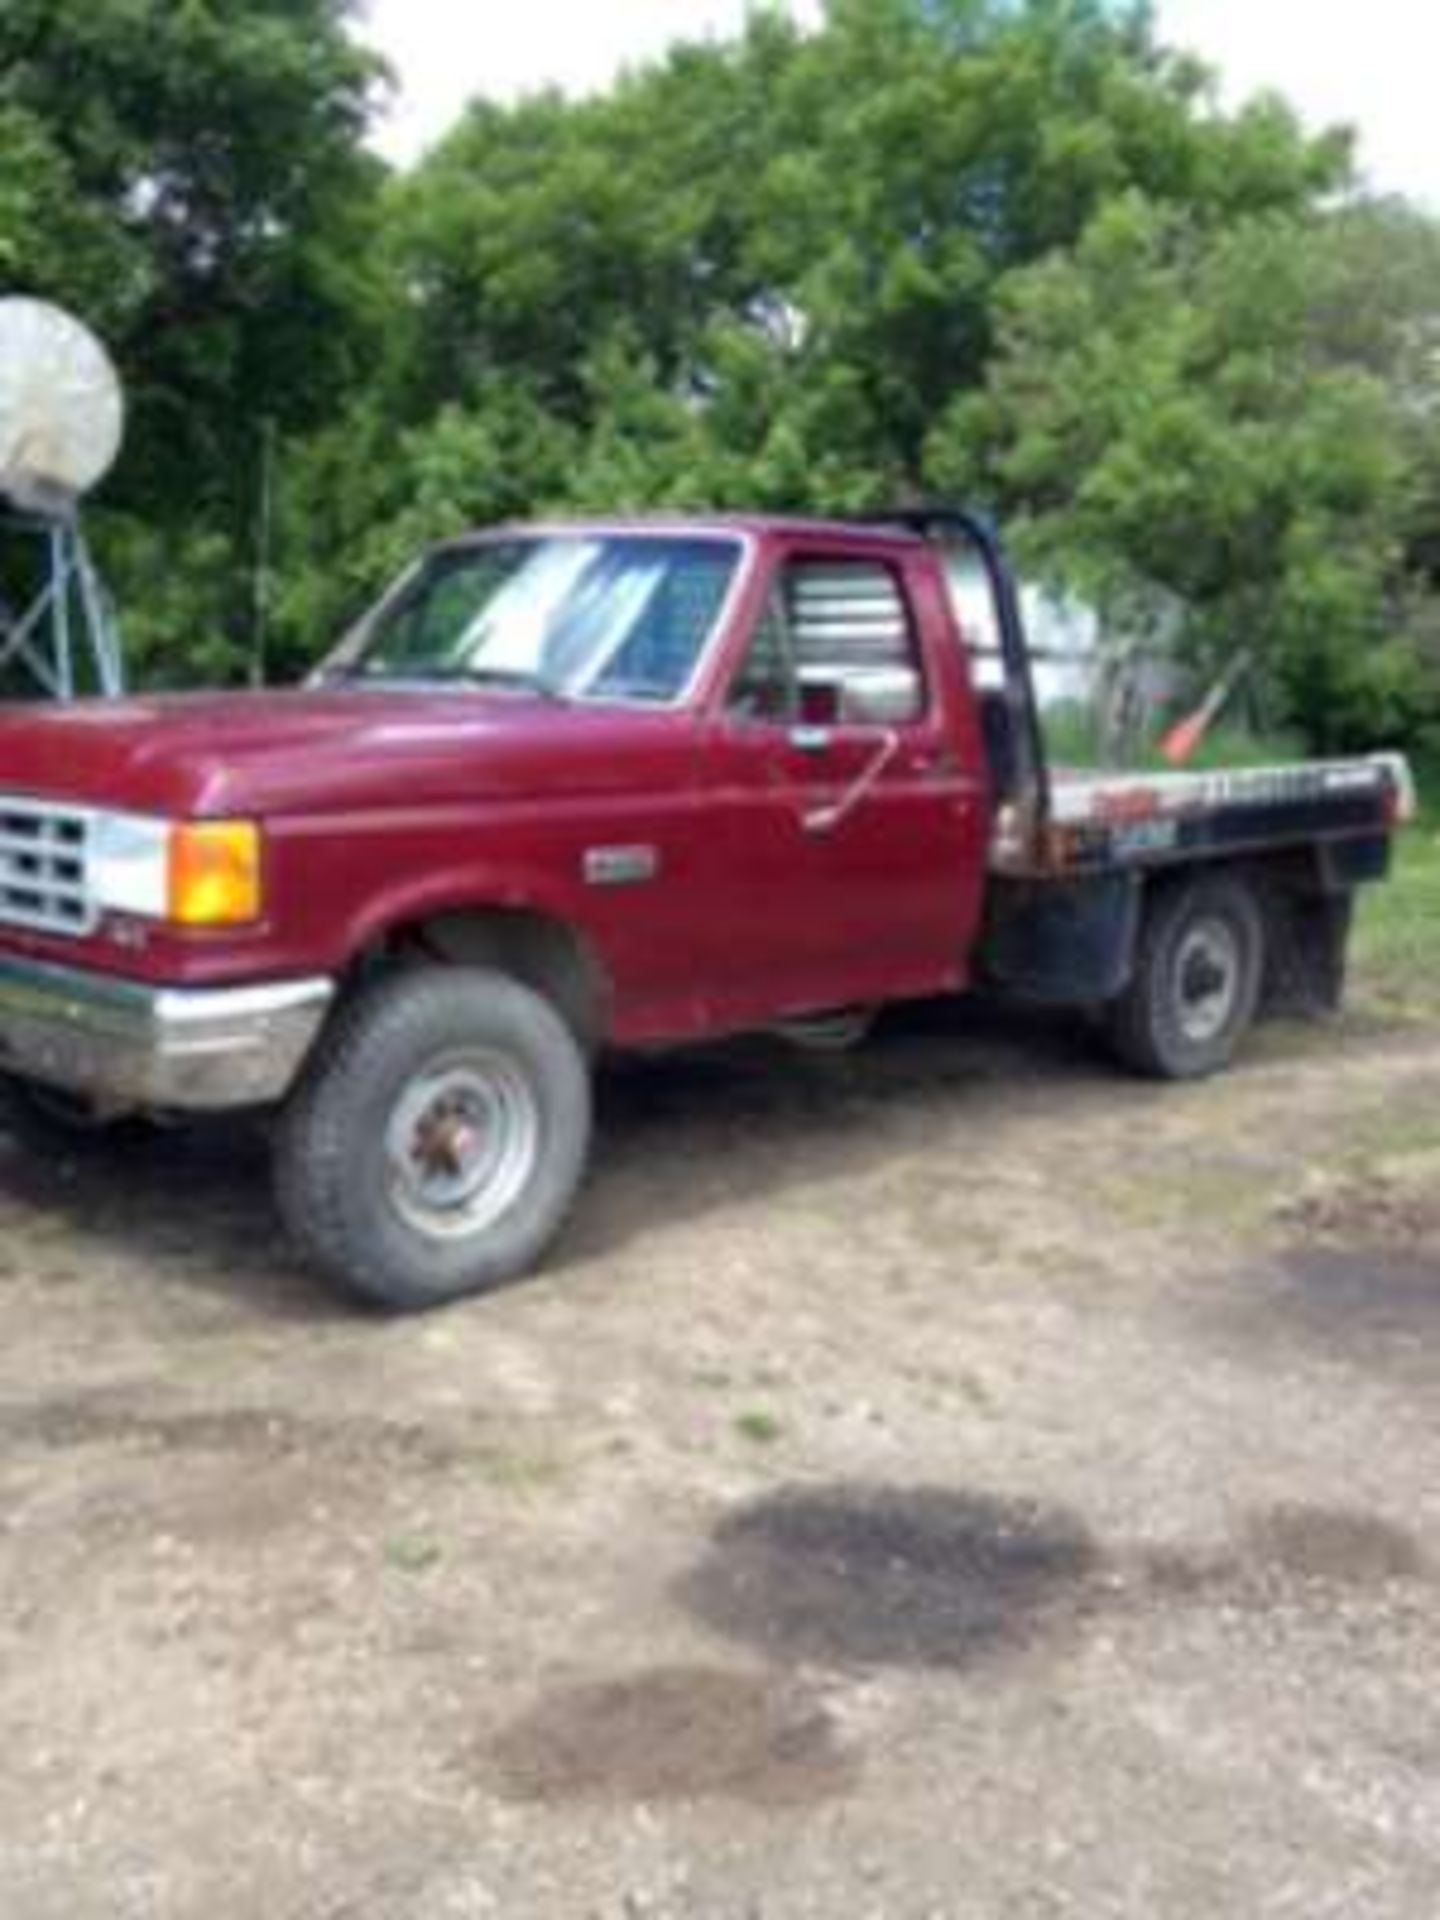 1989 Ford F250, gas, 4X4, DewEze Hydro Deck, 69,000kms, s/n 2FTHF26H3KCA68556 (Previously registered